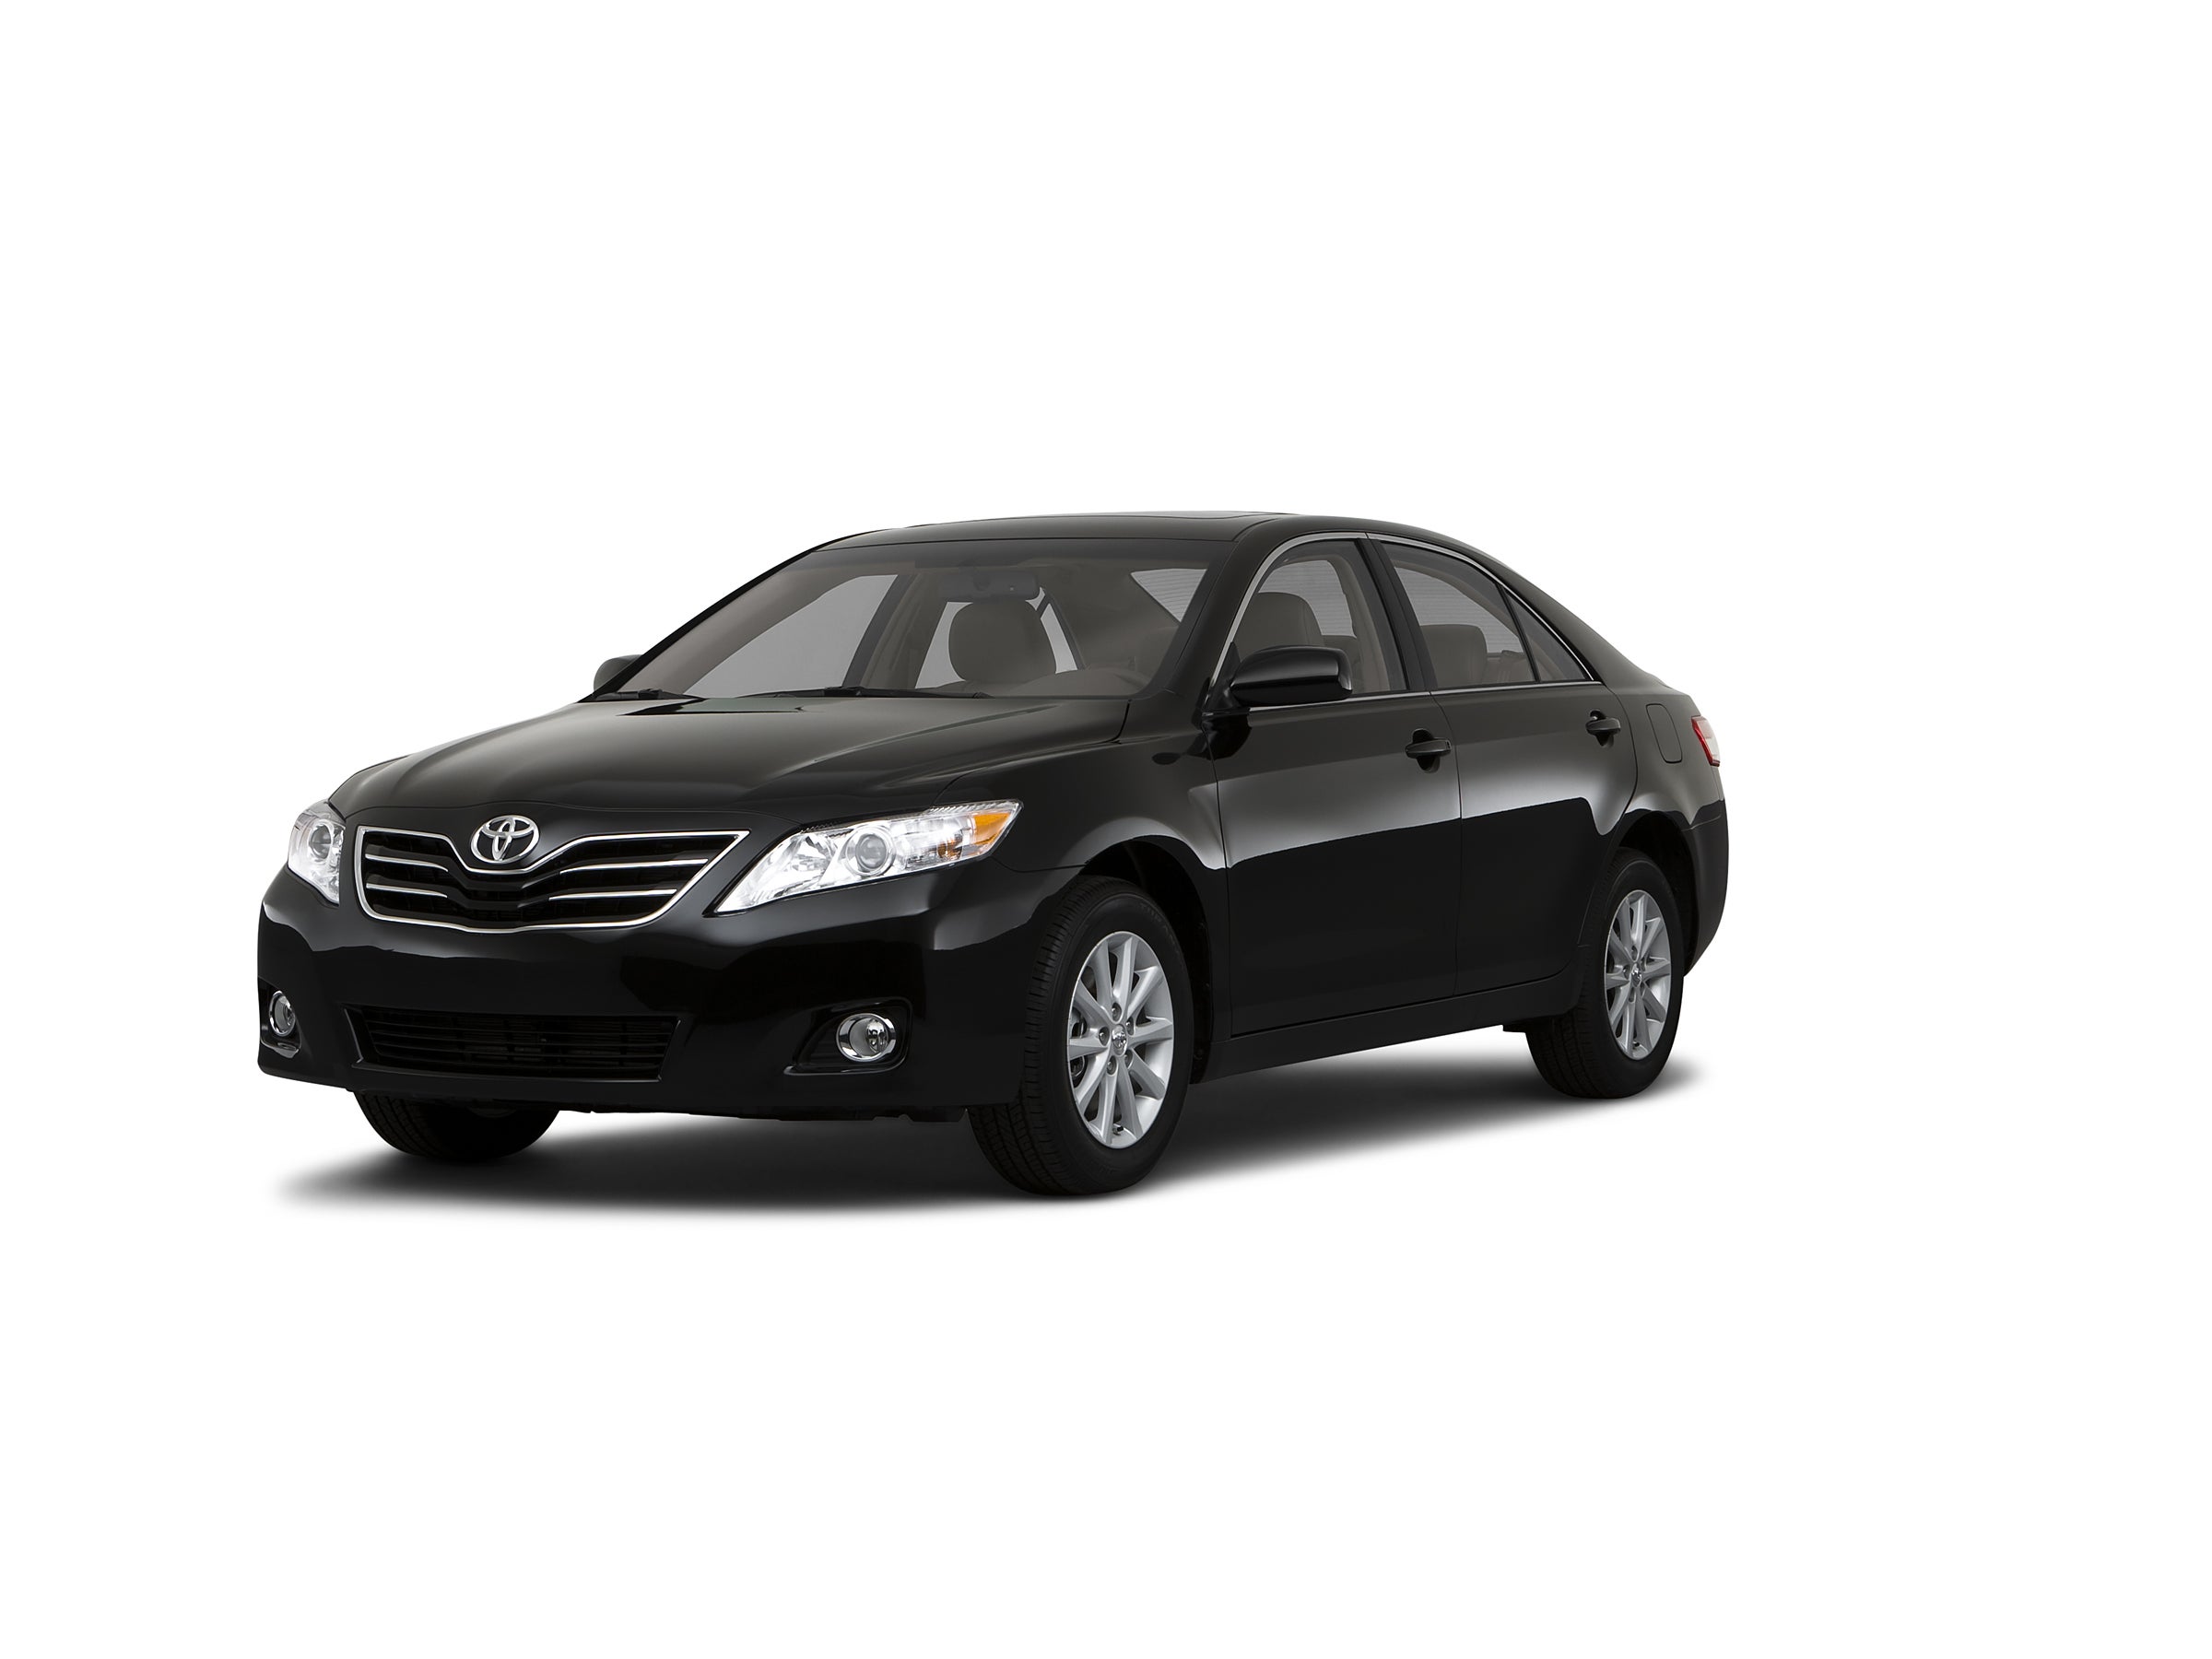 2007 - 2011 Toyota Camry Models